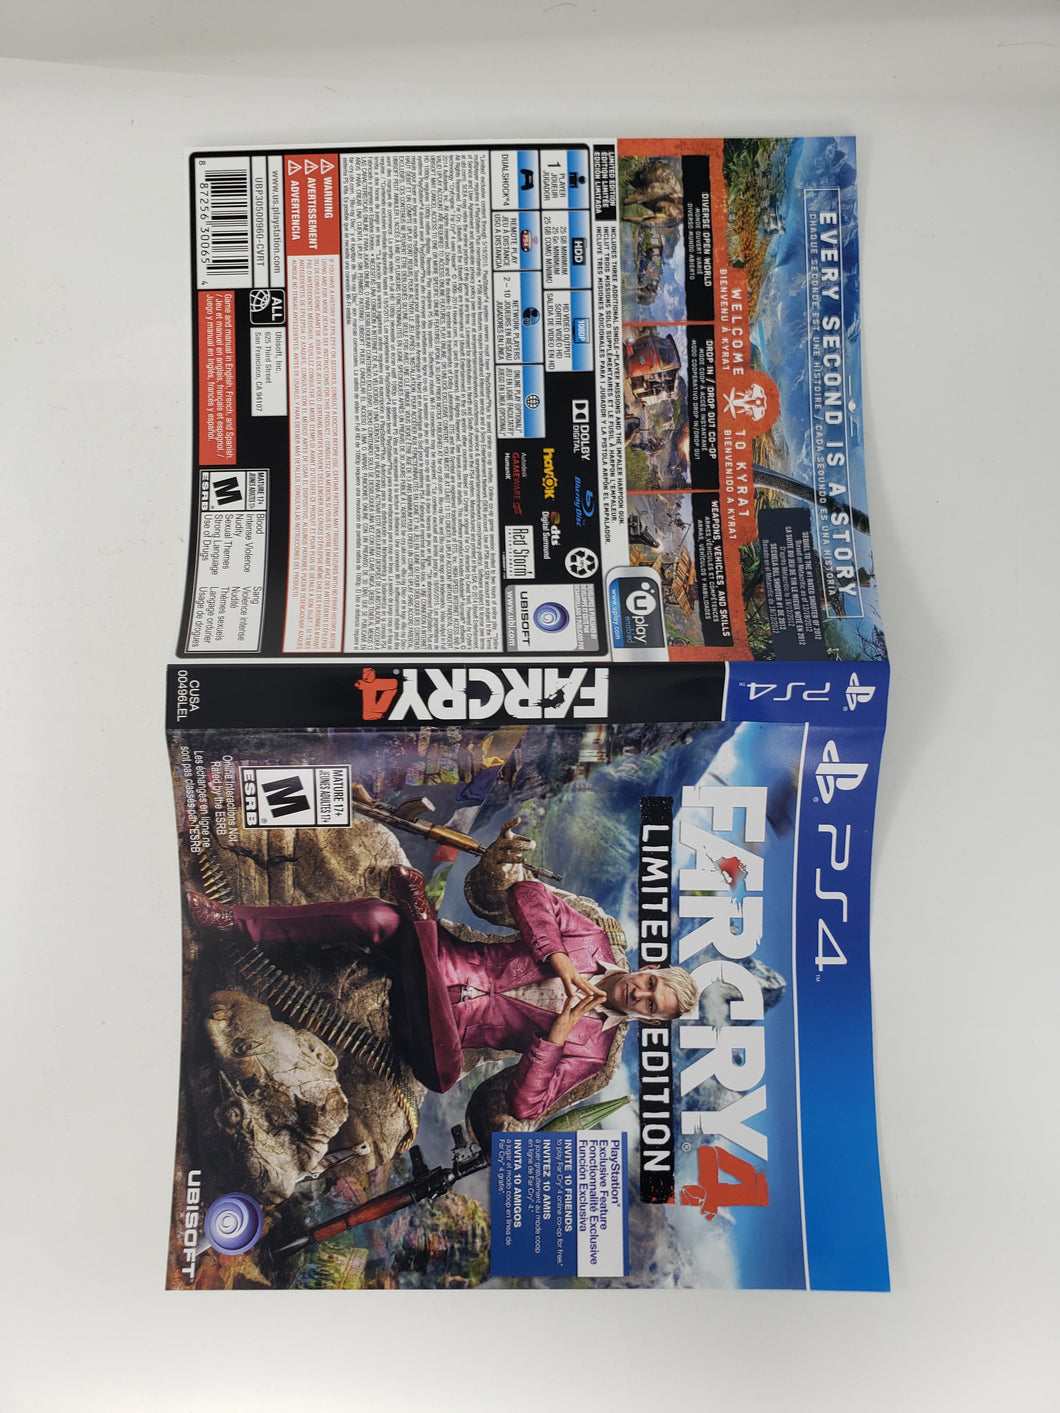 Far Cry 4 [Édition Limitée] [Couverture] - Sony Playstation 4 | PS4